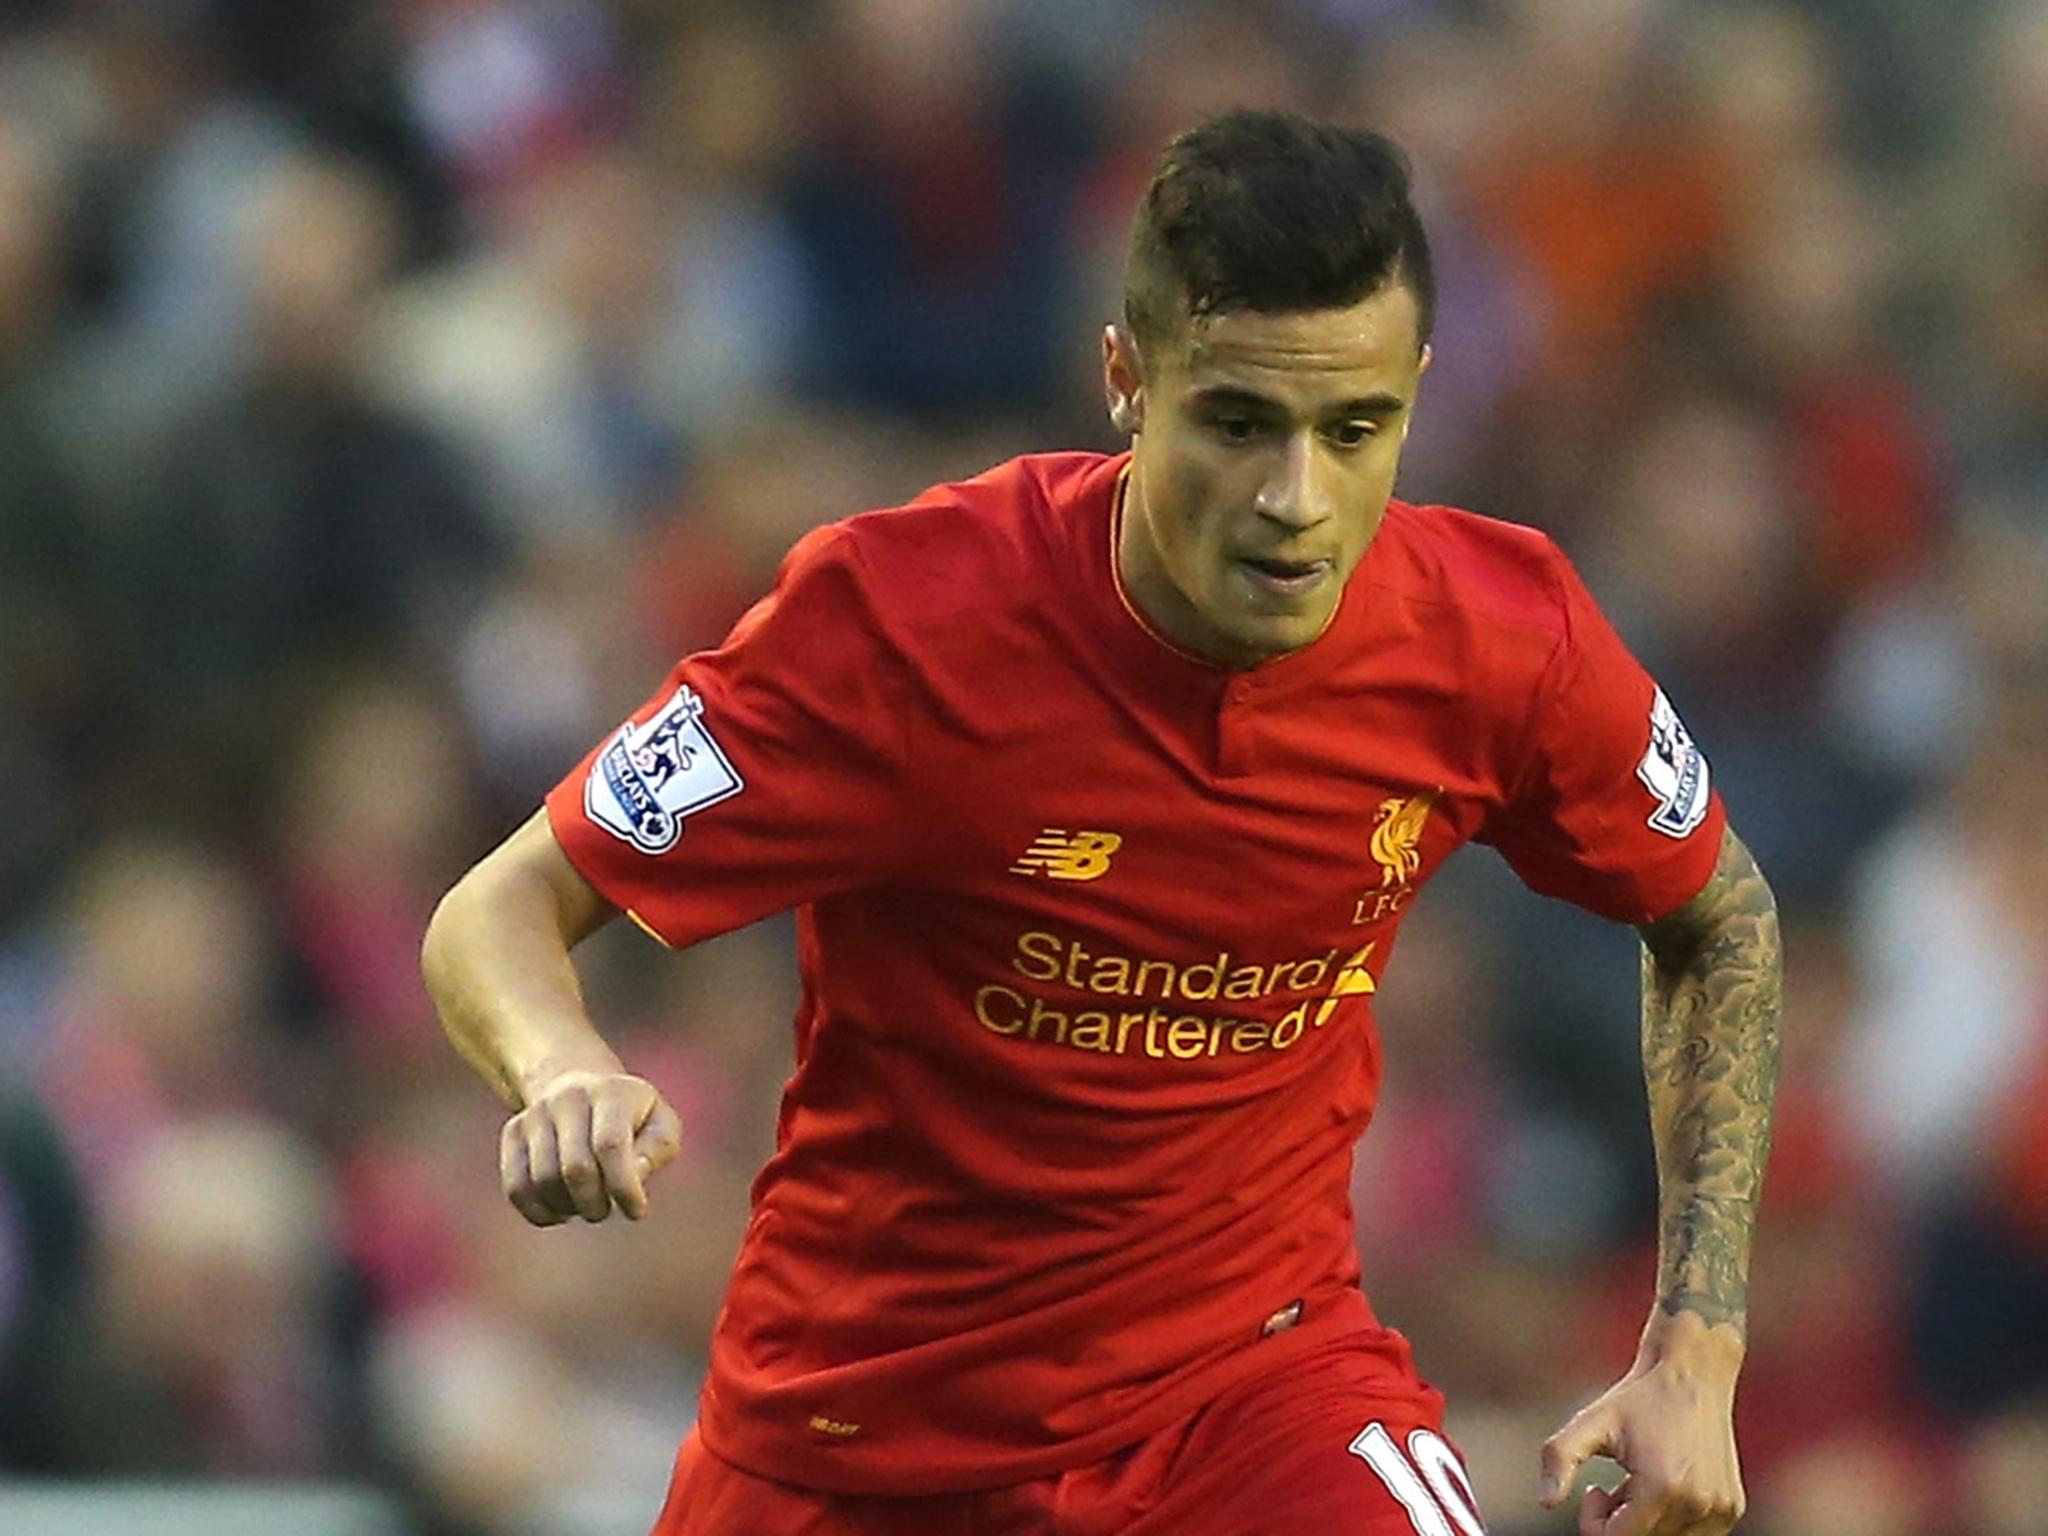 Coutinho was named Liverpool's player of the year for the 2015/16 season